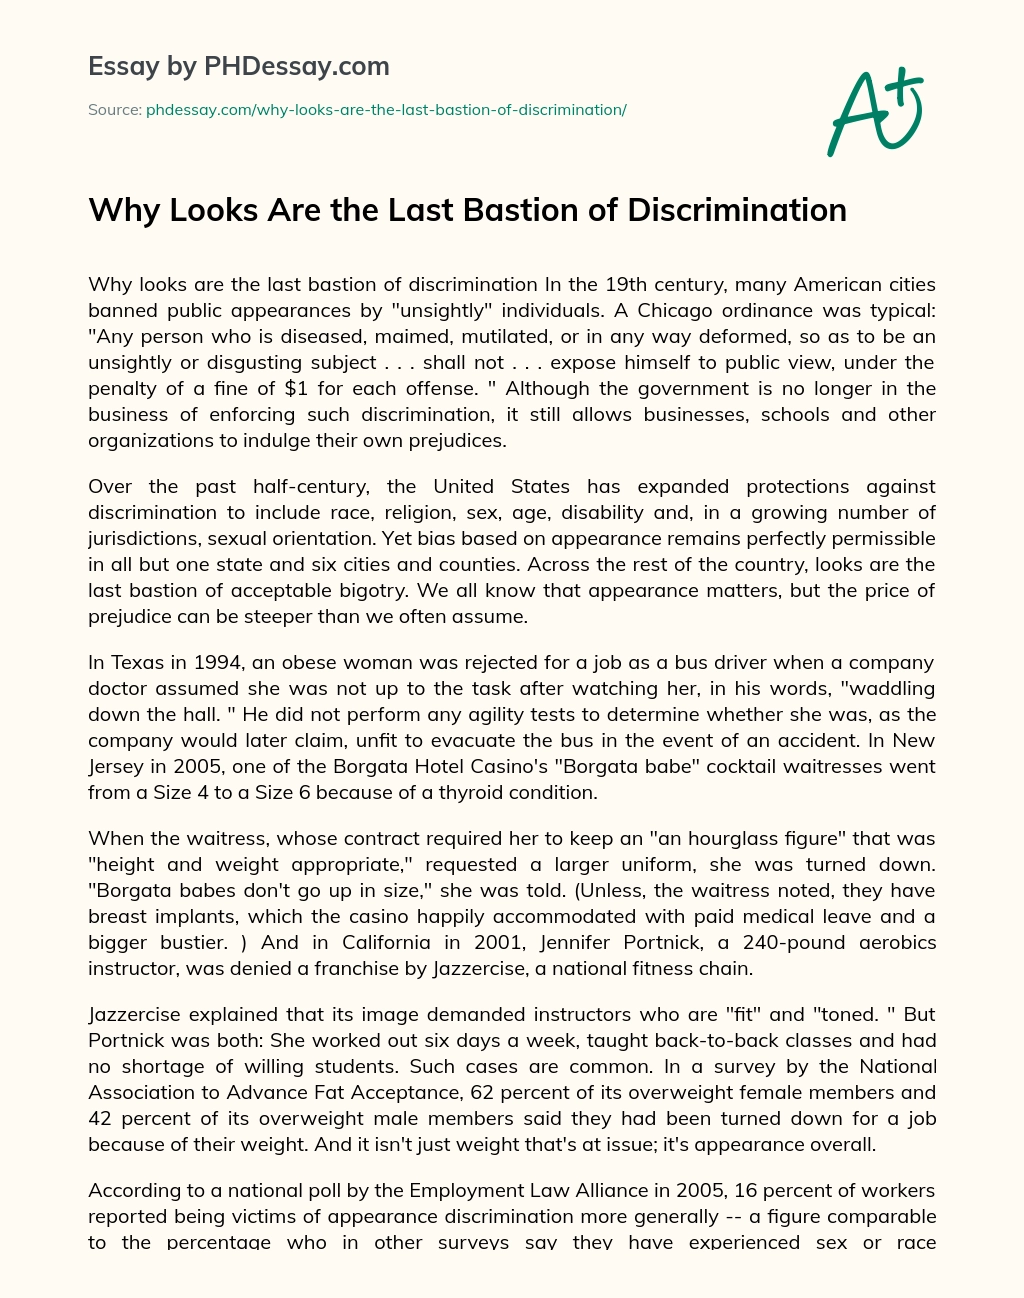 Why Looks Are the Last Bastion of Discrimination essay